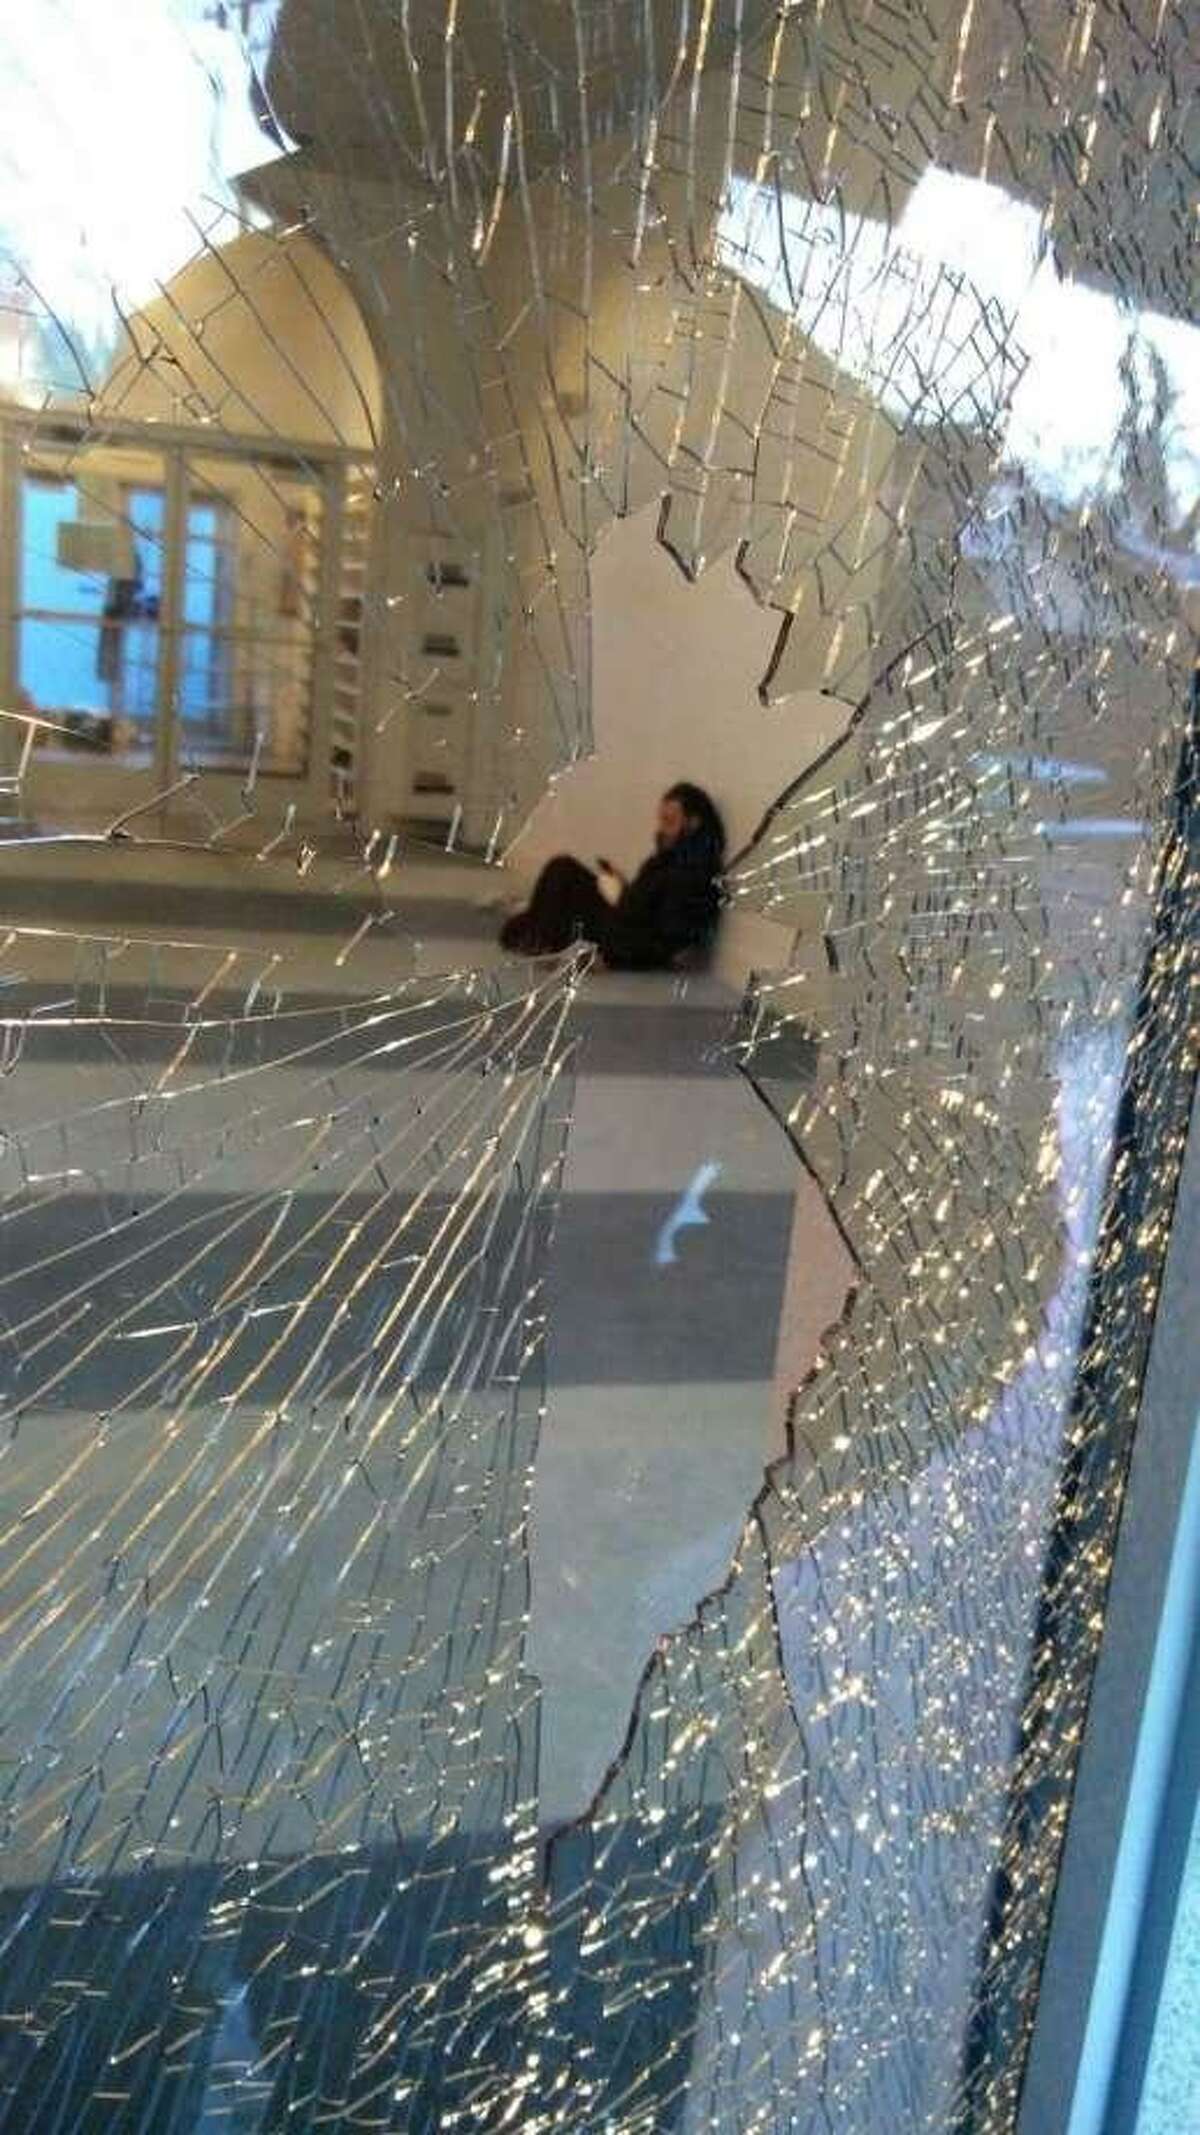 A shattered window seen at the Islamic Center of Davis in January. The suspected vandal, who faces hate crime charges, was identified as 30-year-old Davis resident Lauren Kirk-Coehlo, police said.